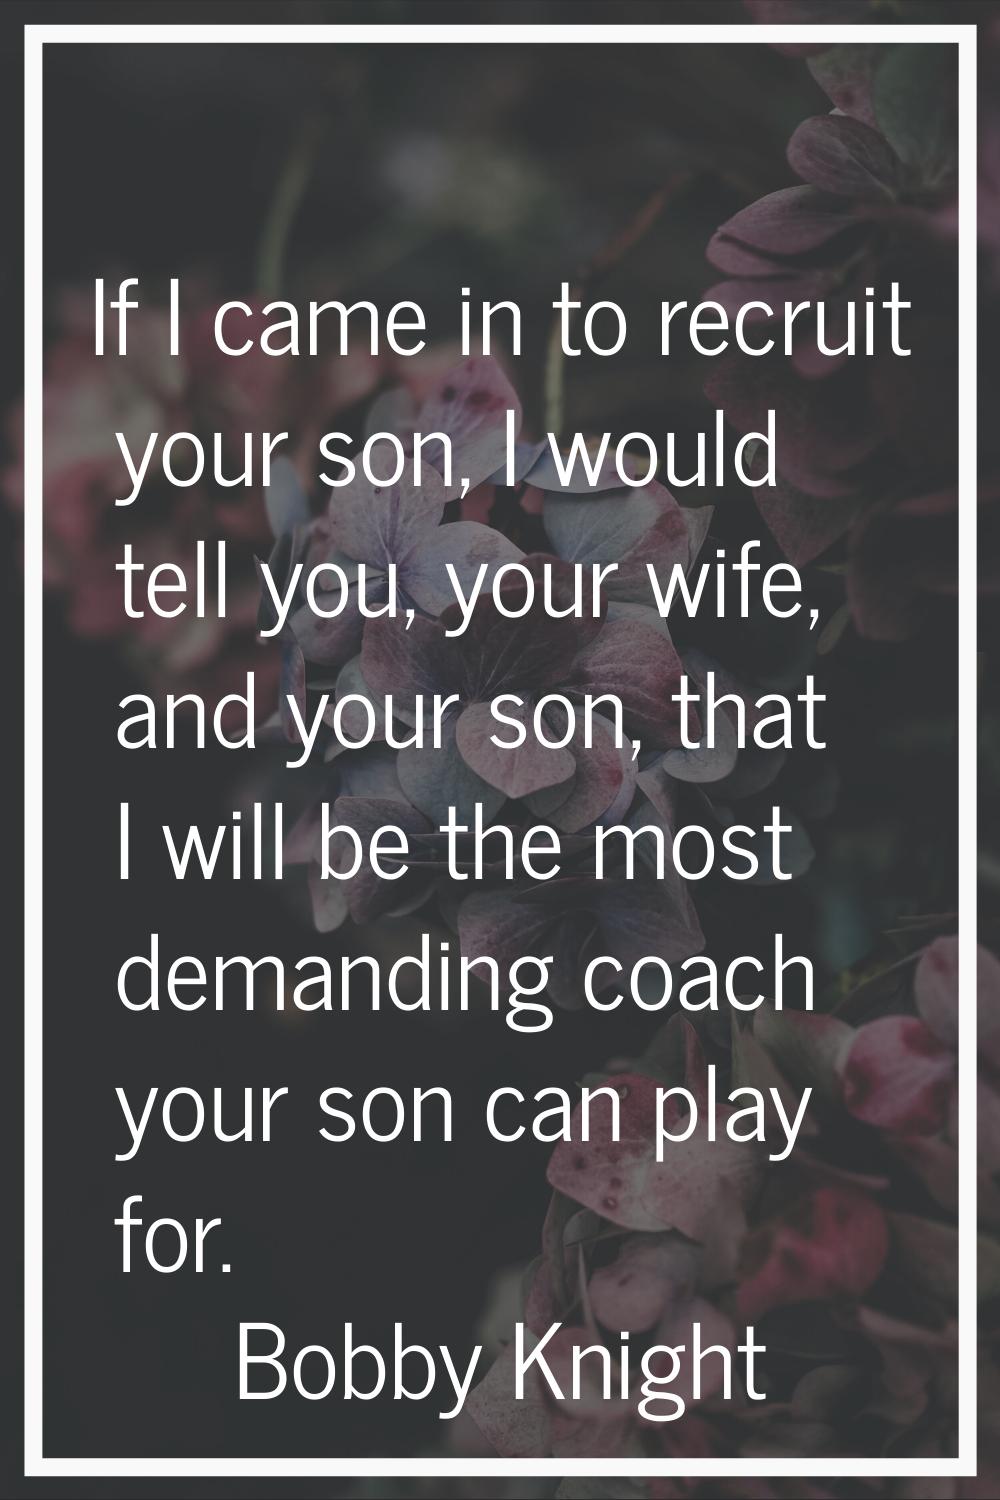 If I came in to recruit your son, I would tell you, your wife, and your son, that I will be the mos